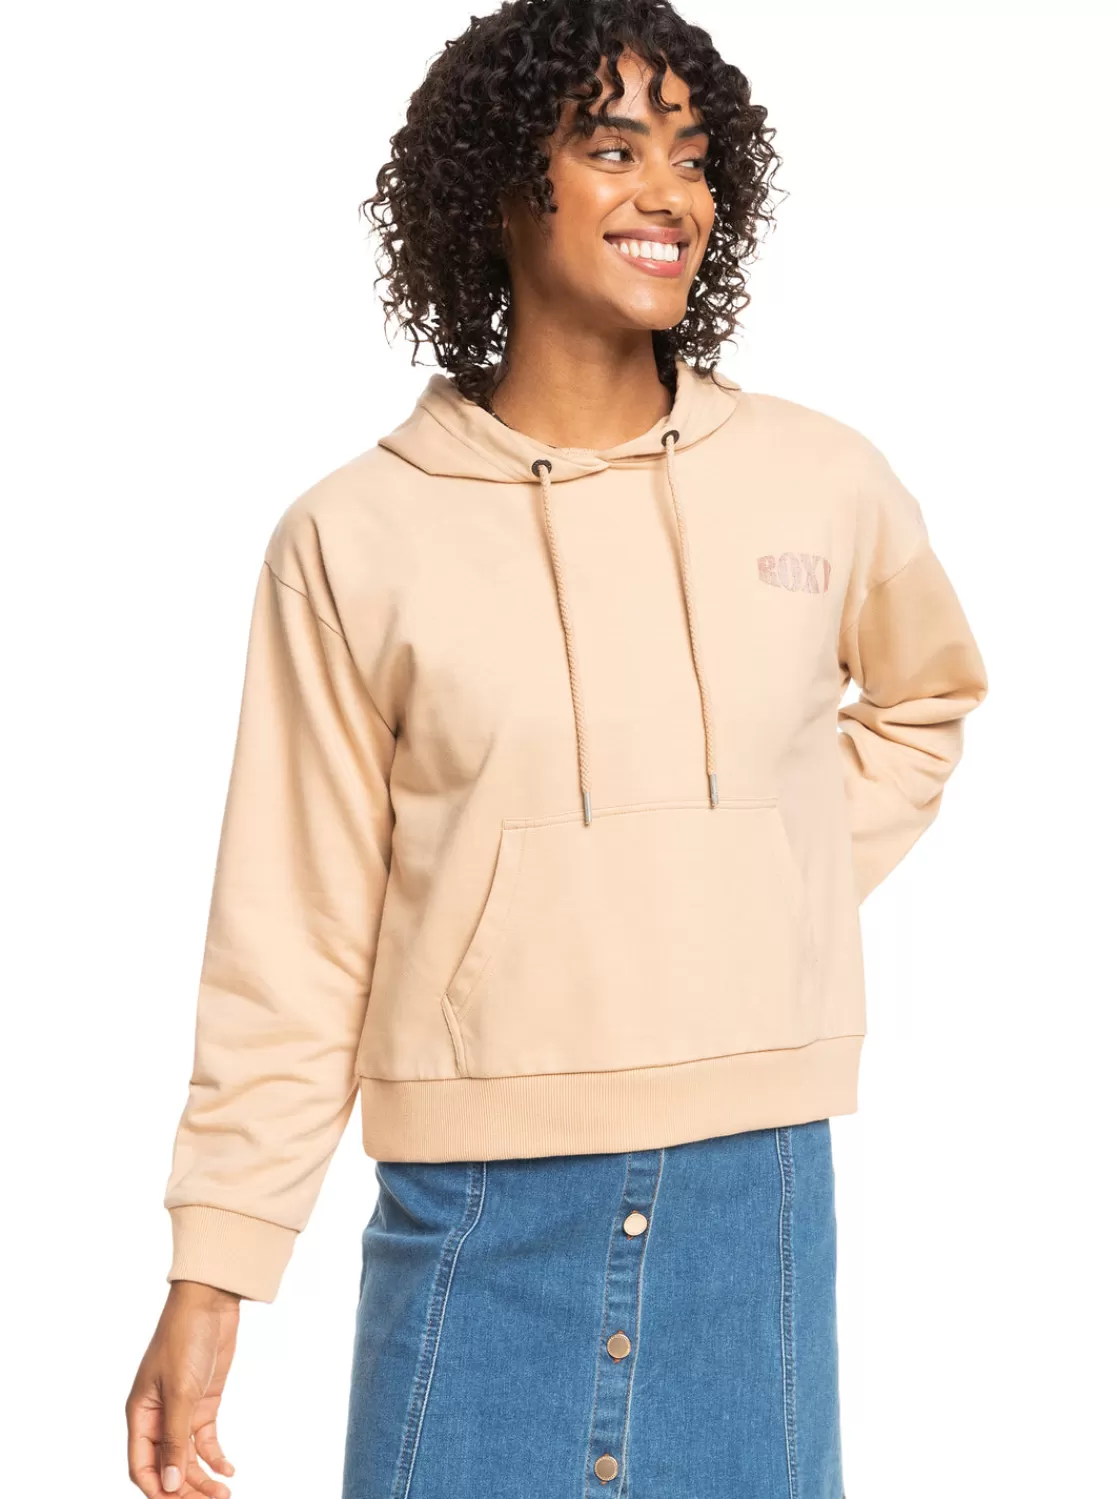 Afternoon Hike A Hoodie-ROXY Discount